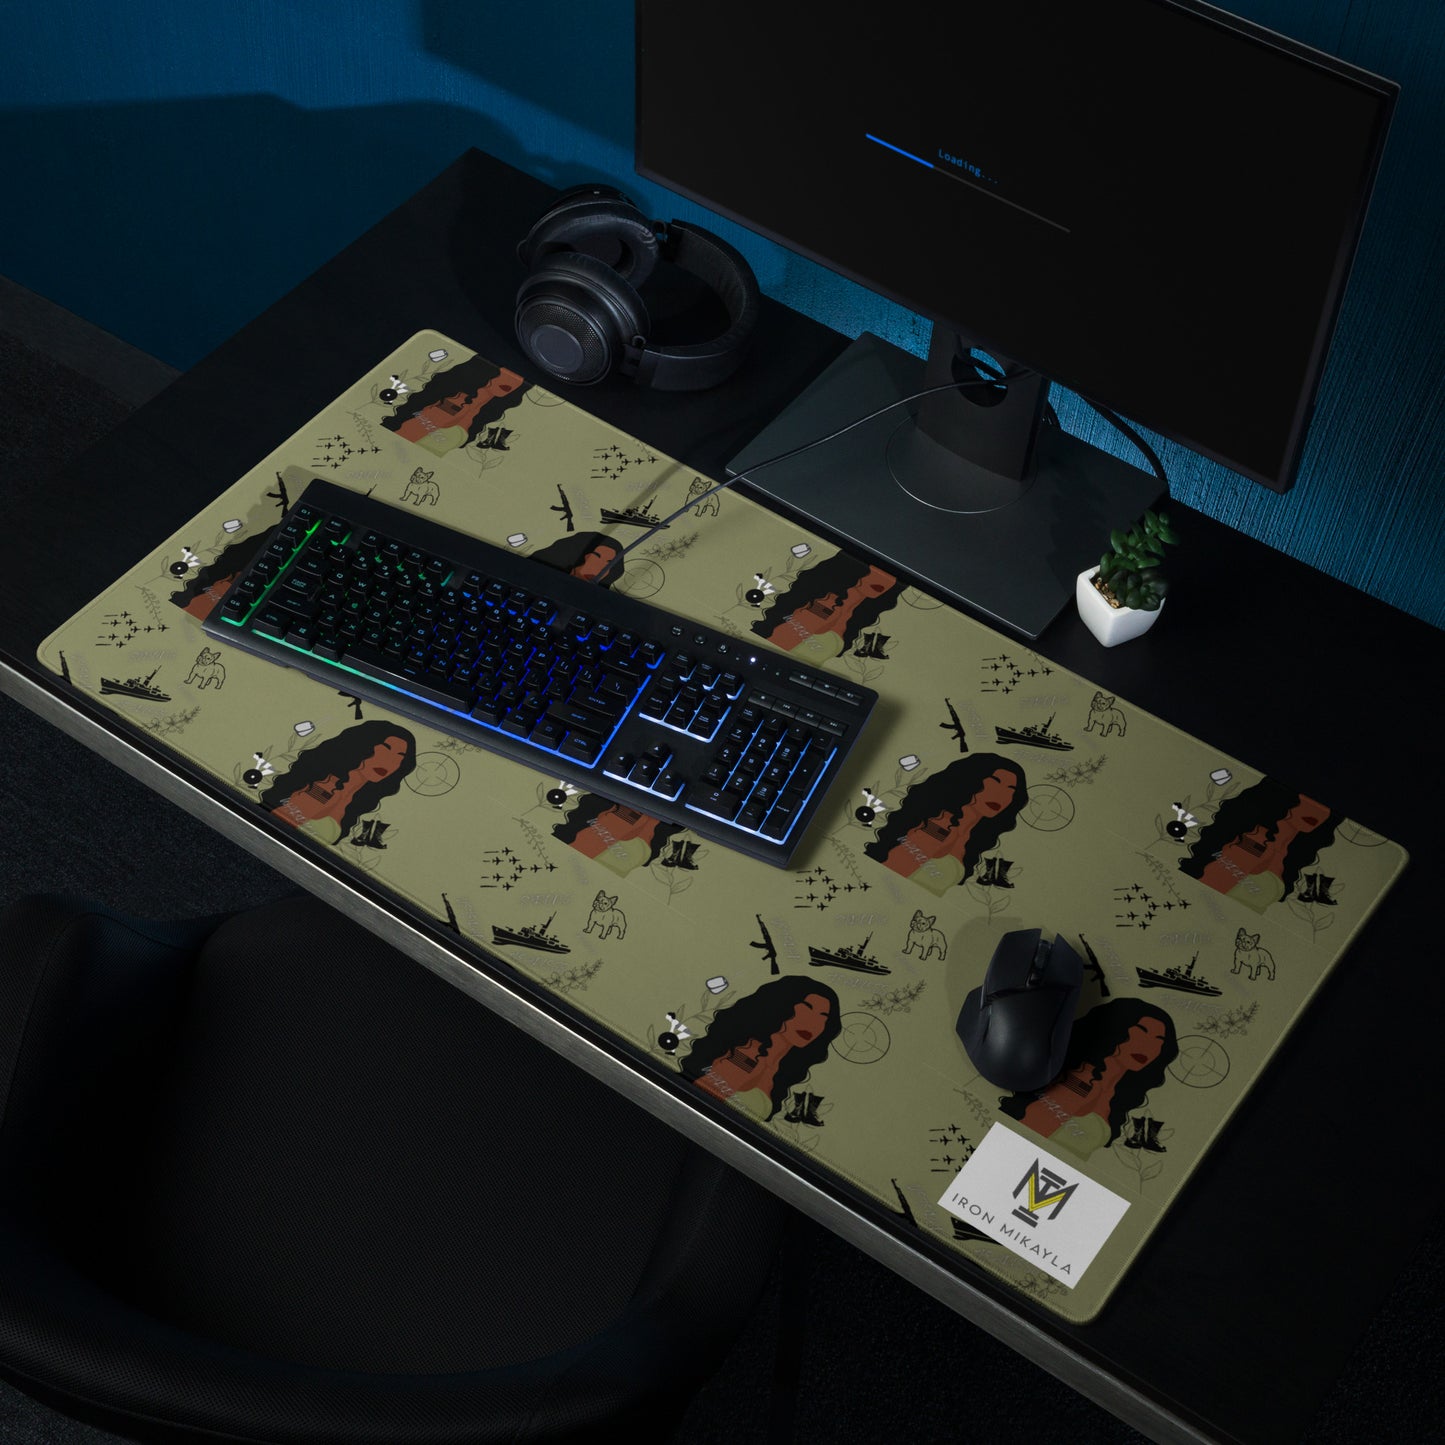 Iron Mikayla Gaming mouse pad